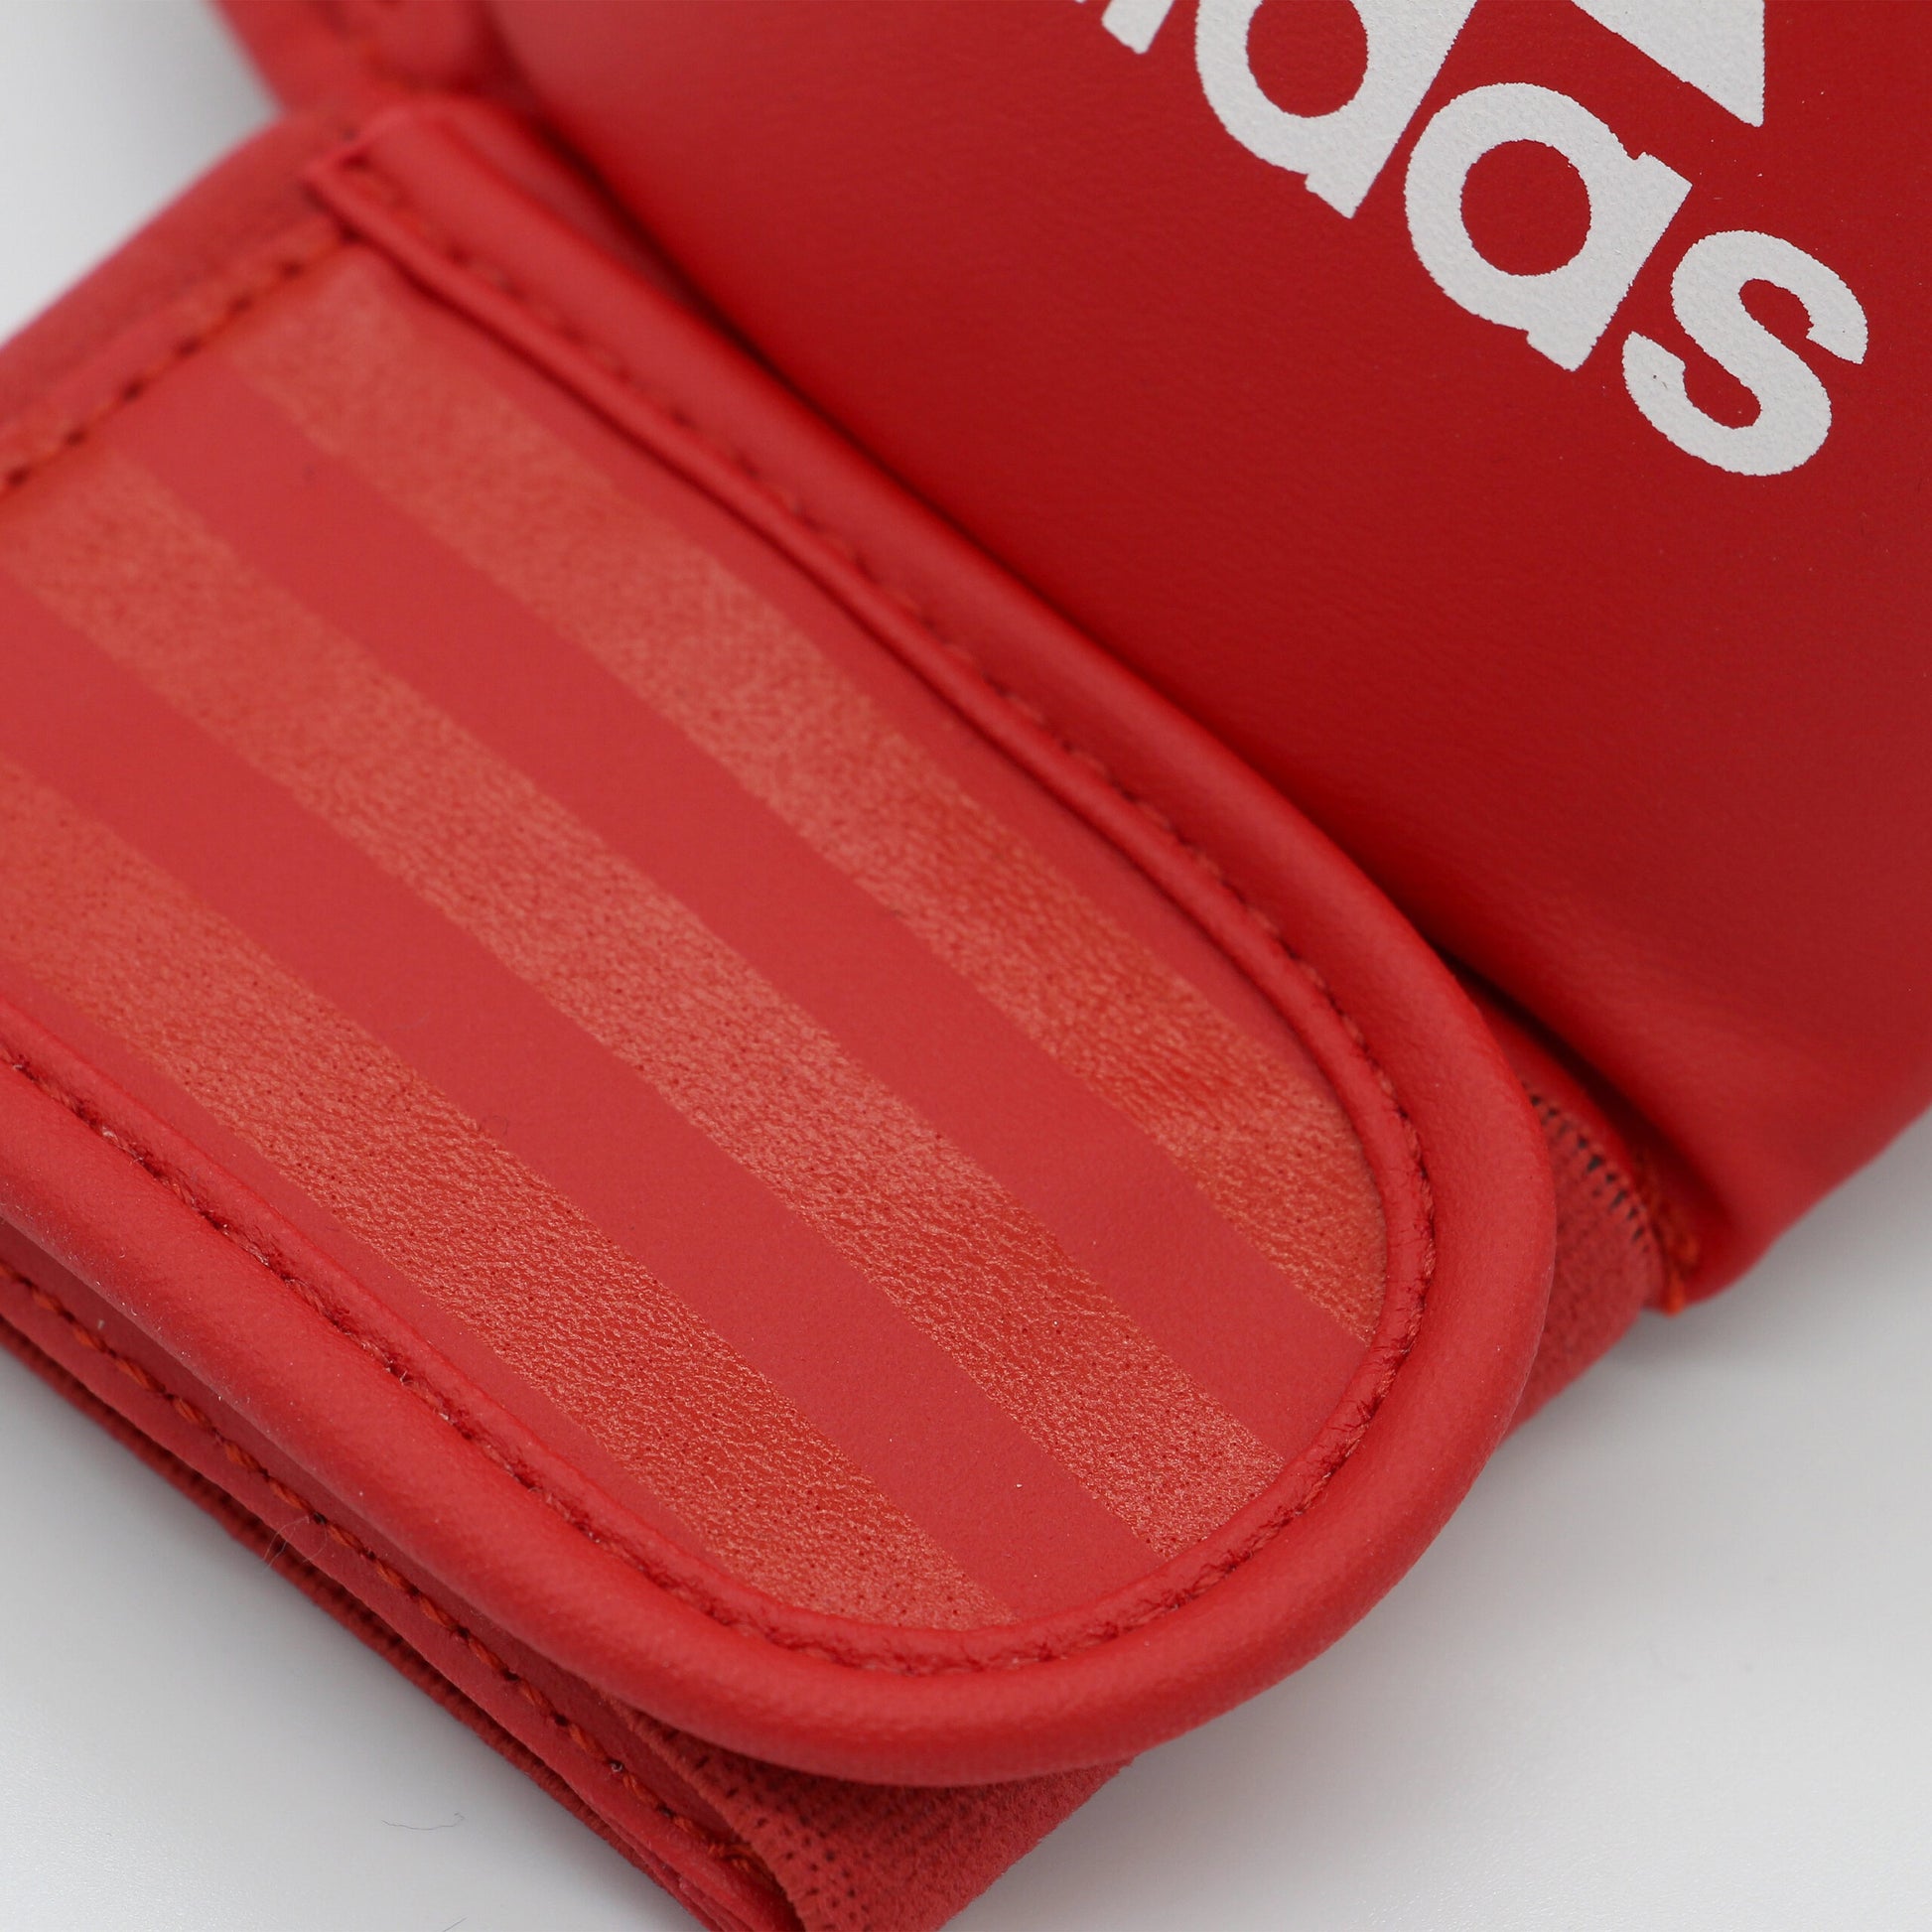 Adidas Wkf Approved Karate Mitts Red 05